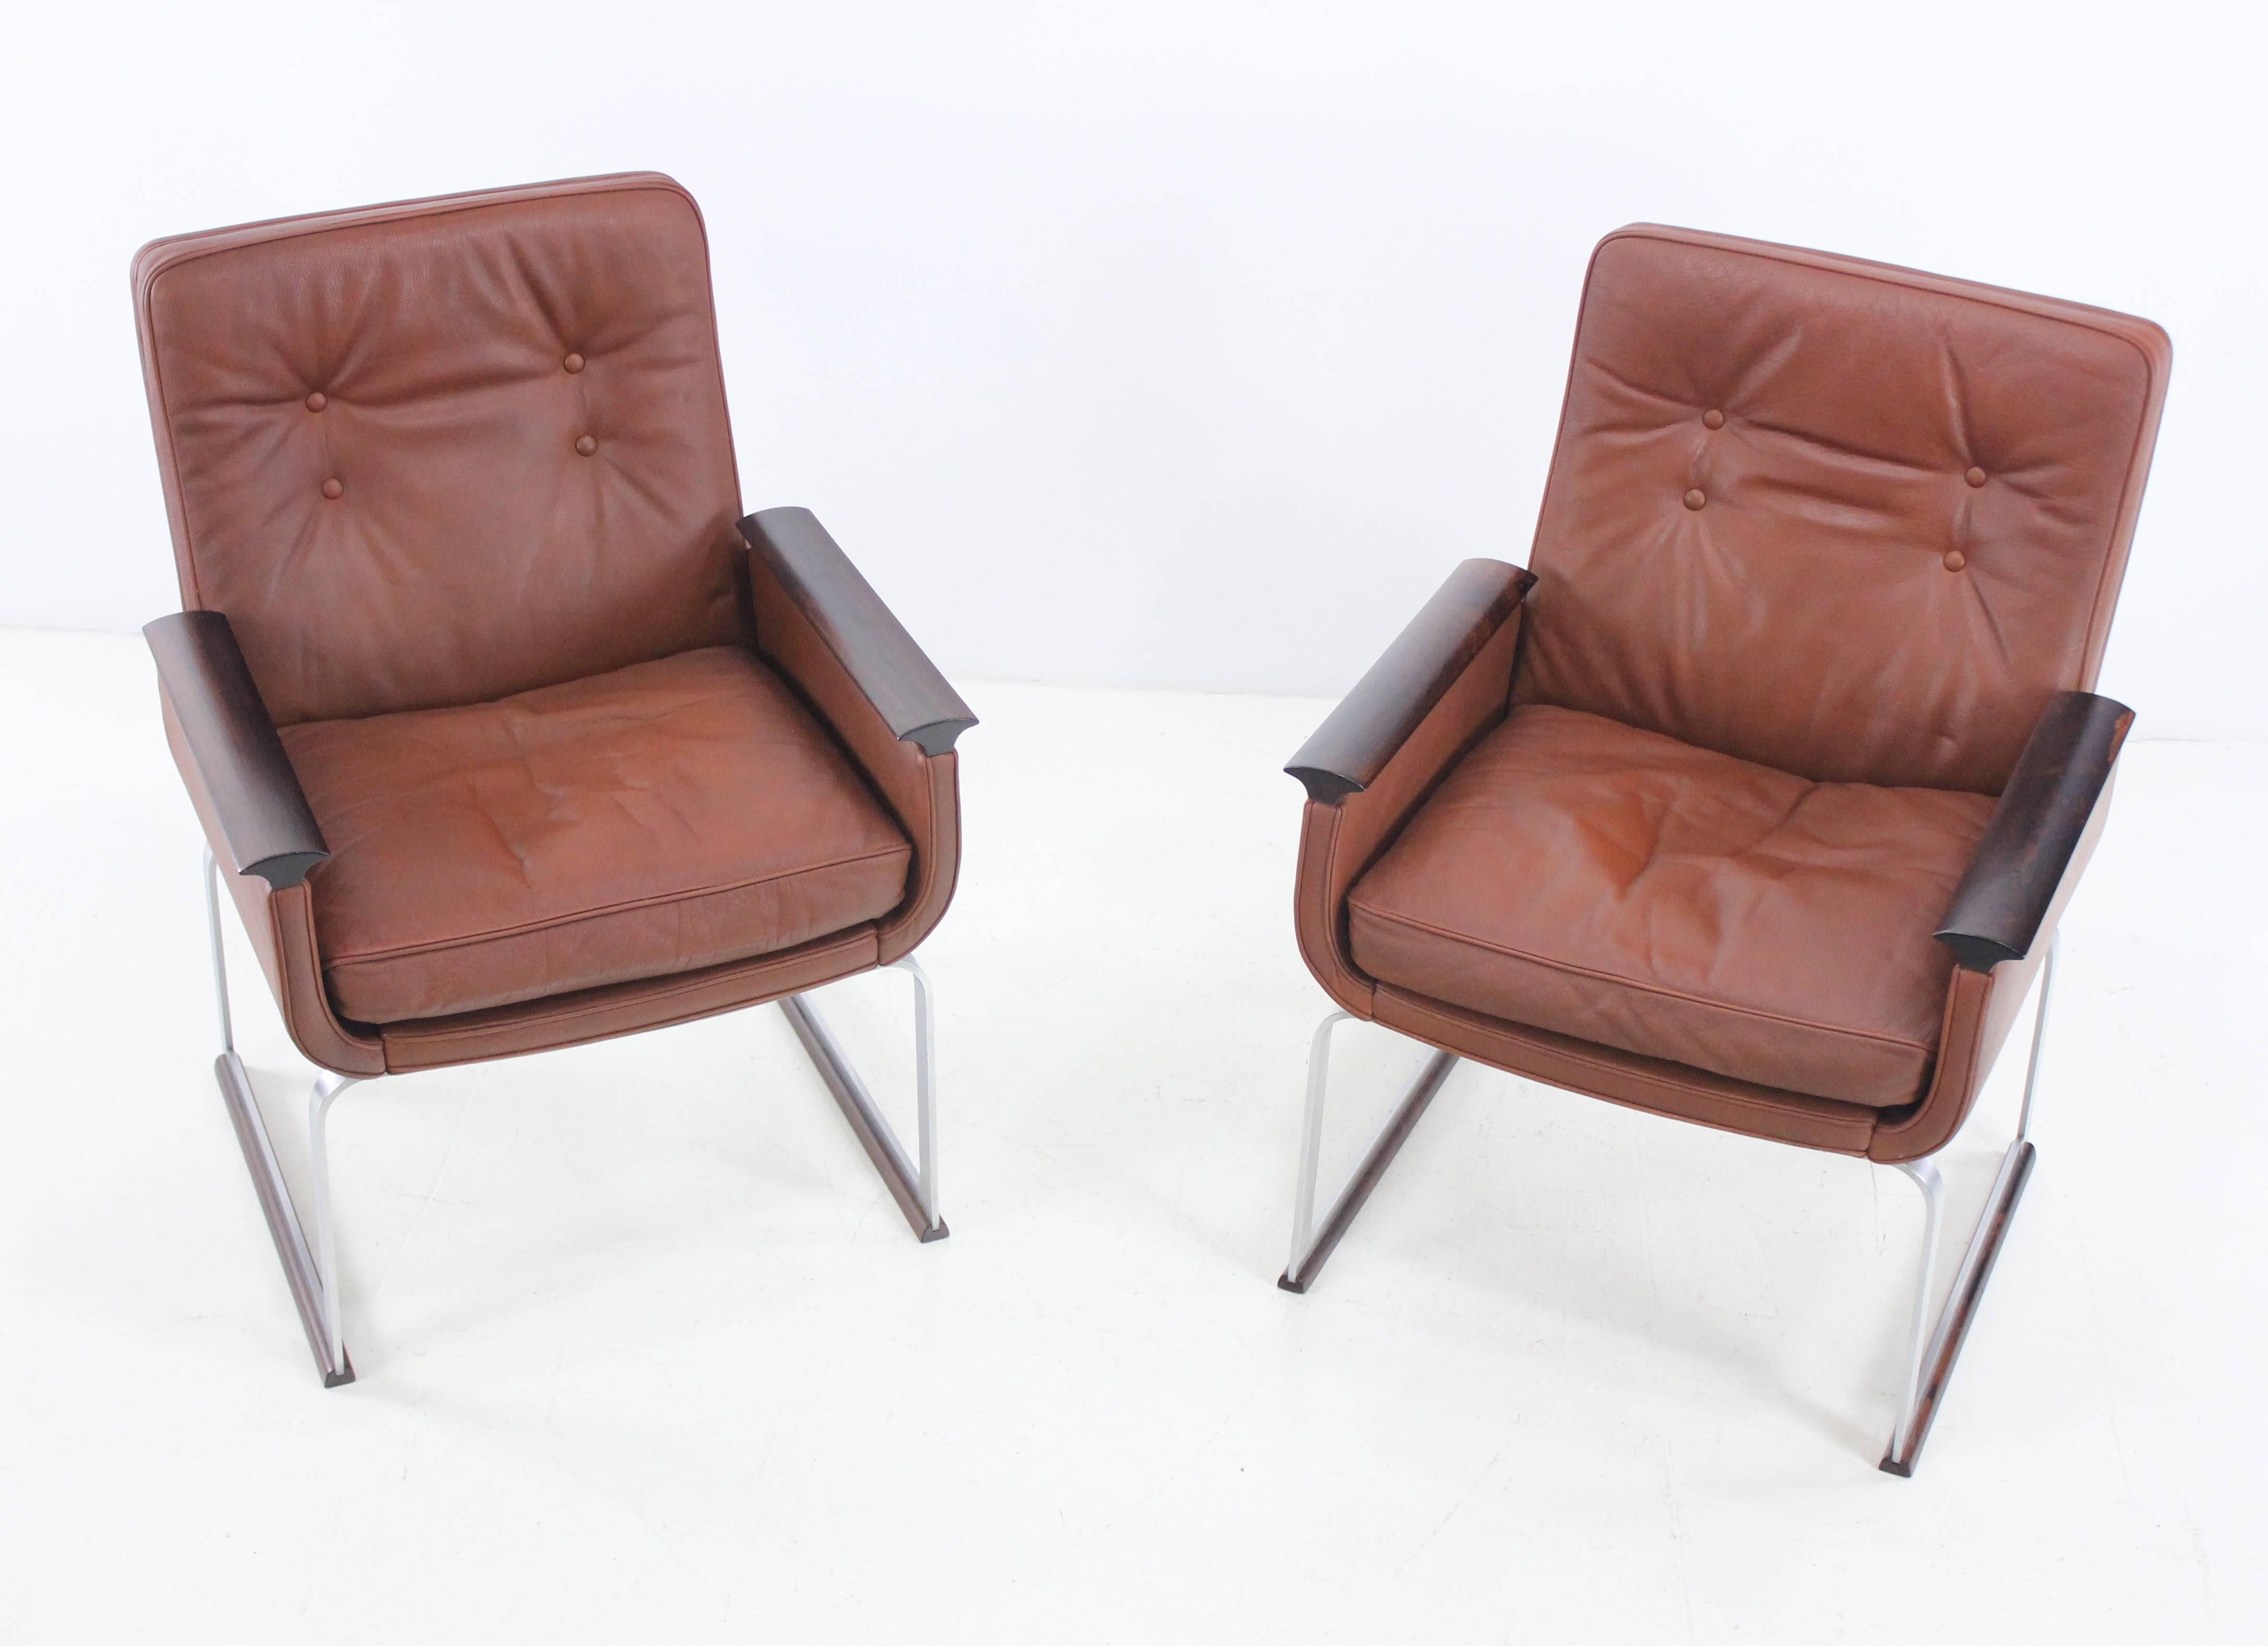 Two Scandinavian Modern armchairs.
Designed to fit in a variety of applications from commercial to residential.
Made Norway by Vatne Mobler.
Brushed steel bases, rosewood arms, original leather upholstery.
Professionally restored and refinished